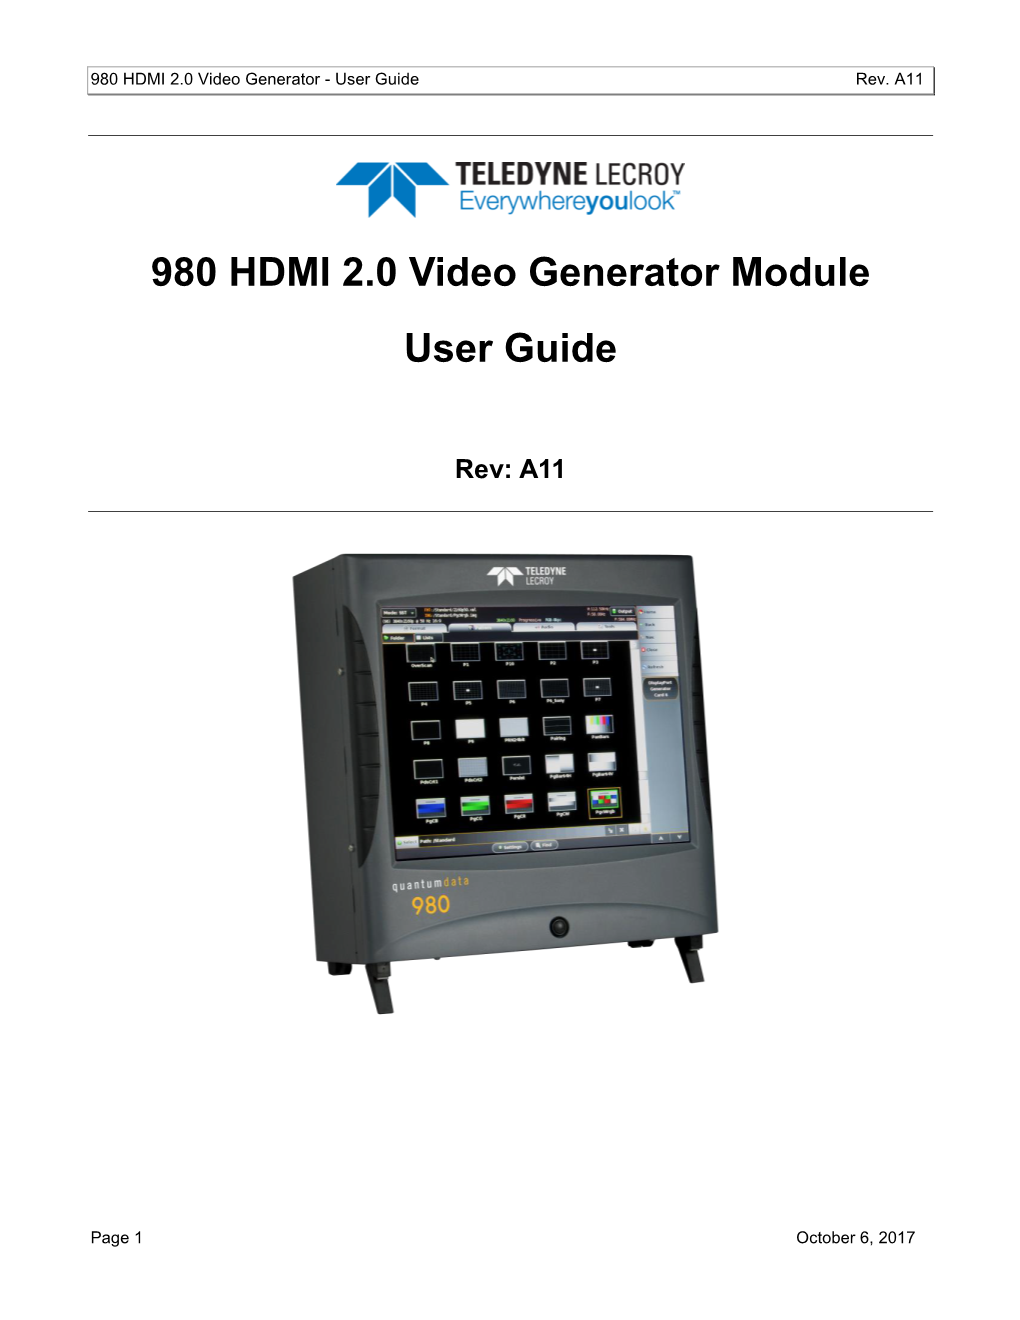 980 Protocol Analyzer User Guide for MHL Compliance Testing